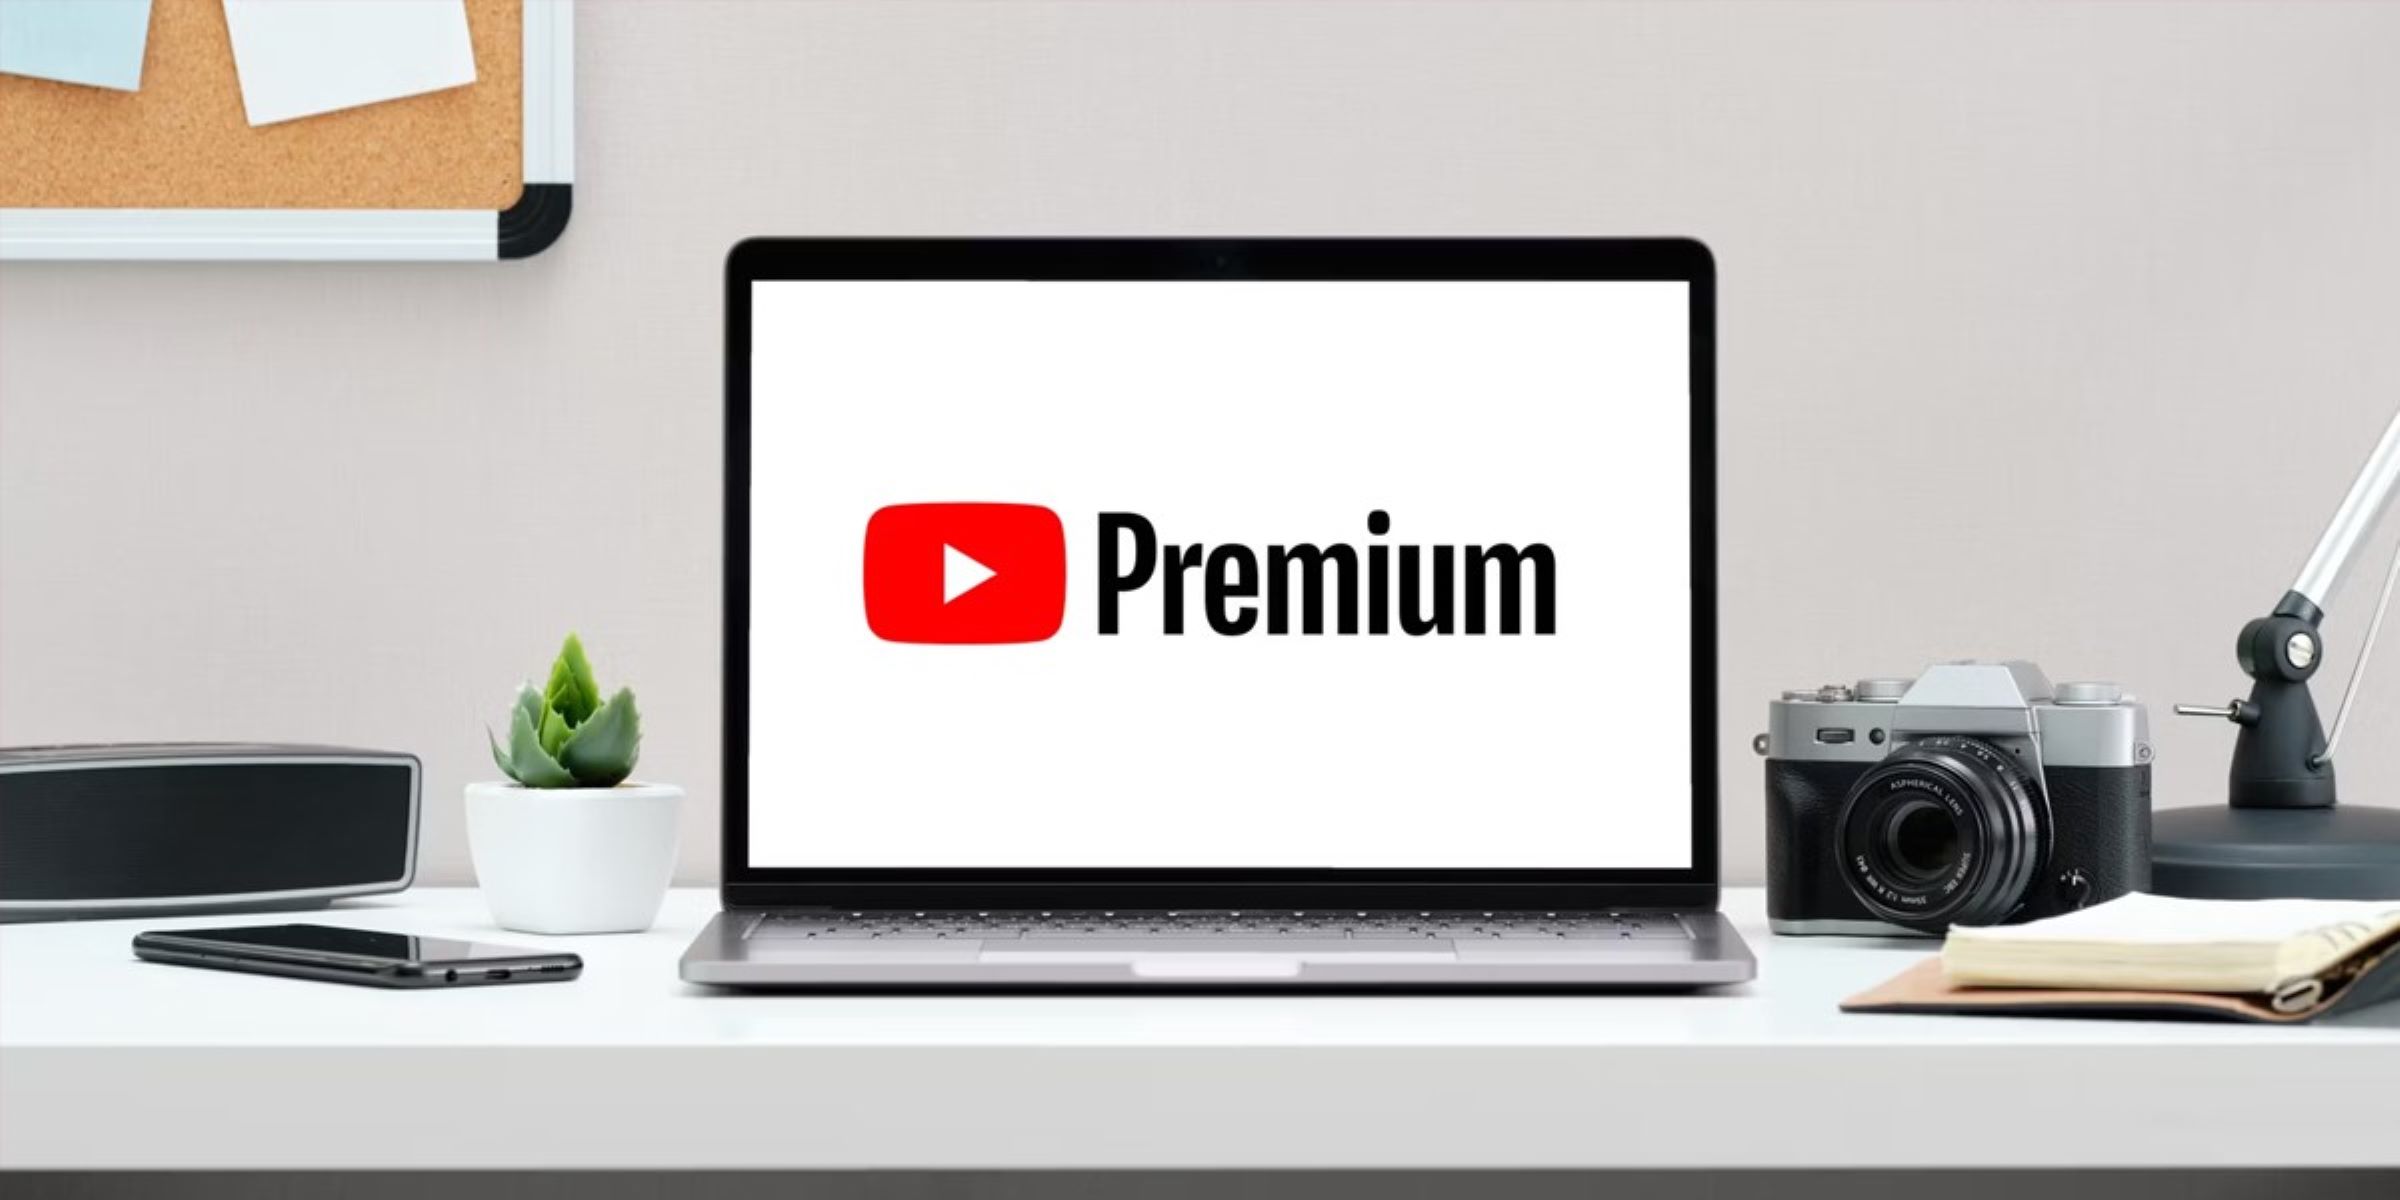 How To Add Someone On Youtube Premium